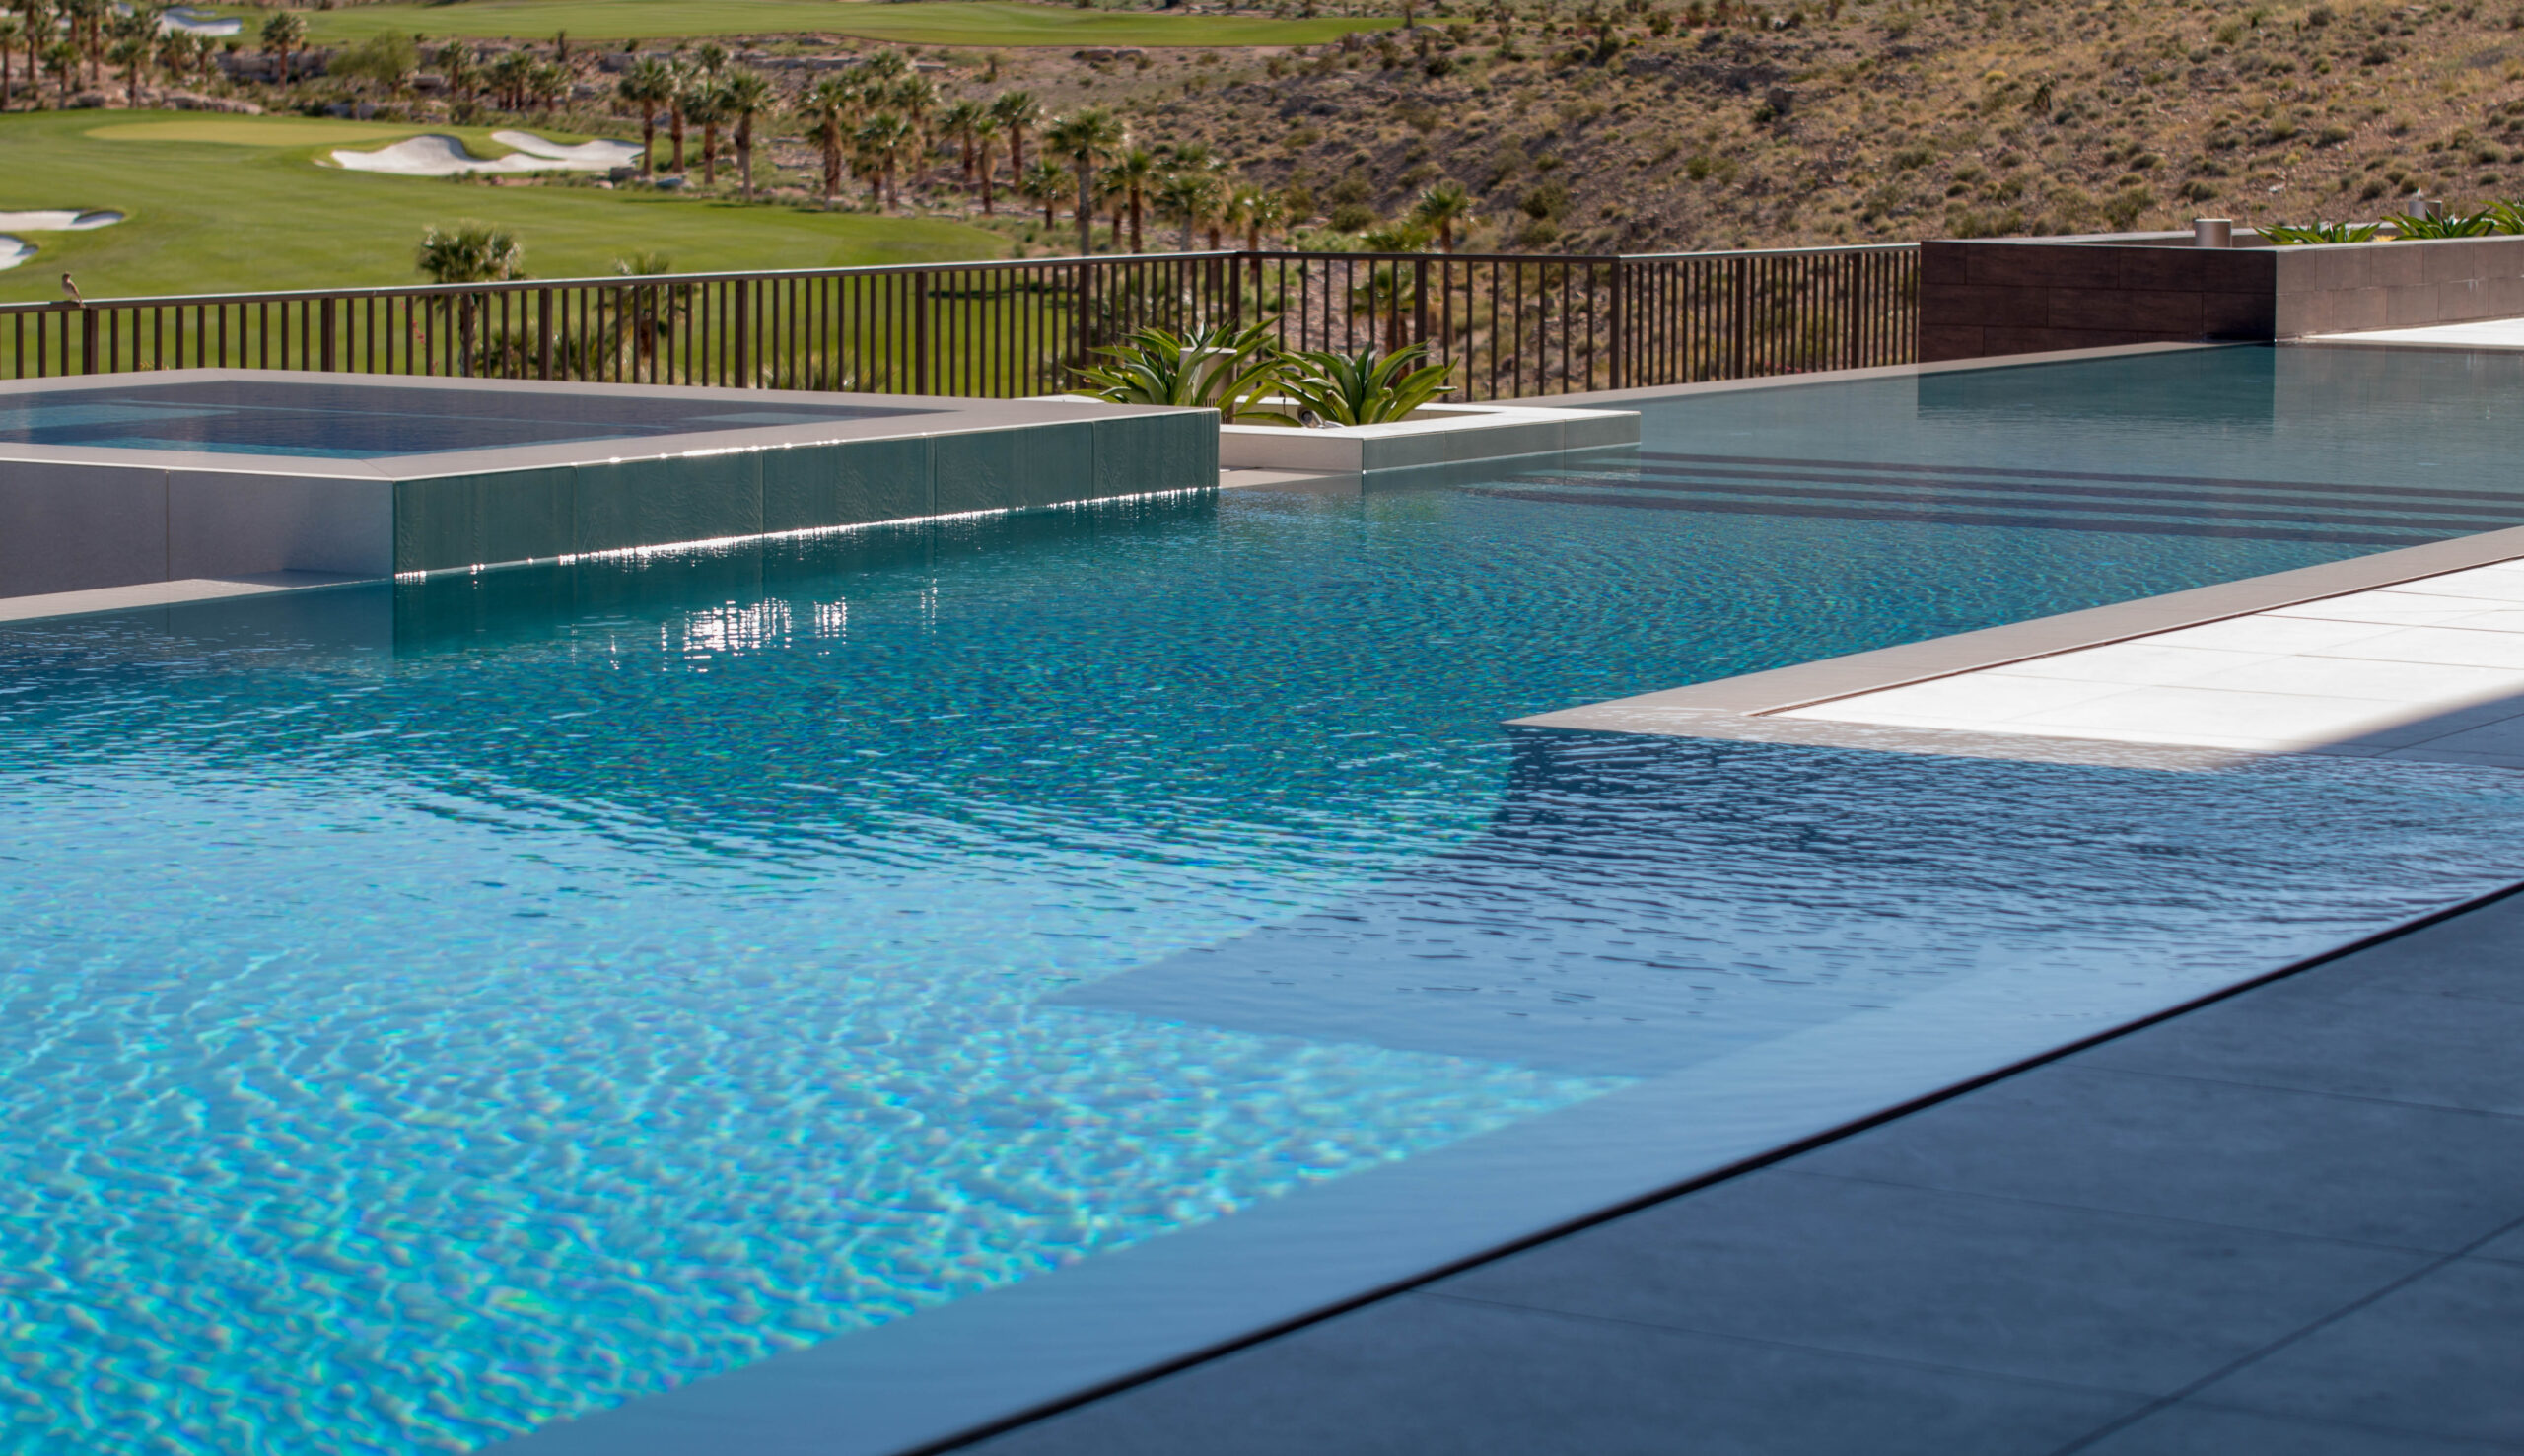 Perimeter overflow pools, also known as vanishing edge or infinity pools, feature water overflowing the edges, creating a stunning optical illusion of the water blending seamlessly with the horizon